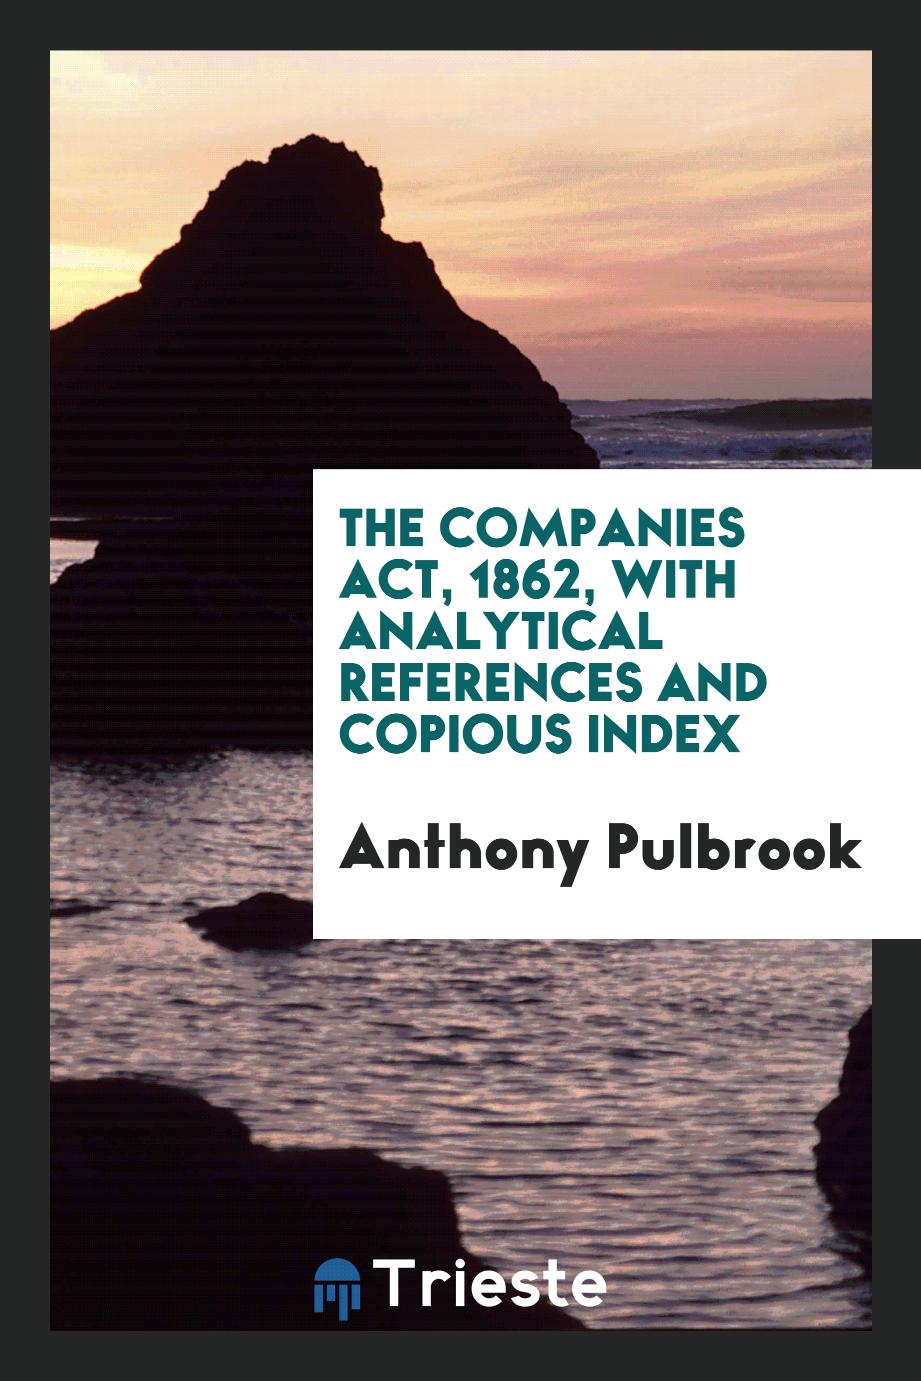 The Companies Act, 1862, with Analytical References and Copious Index